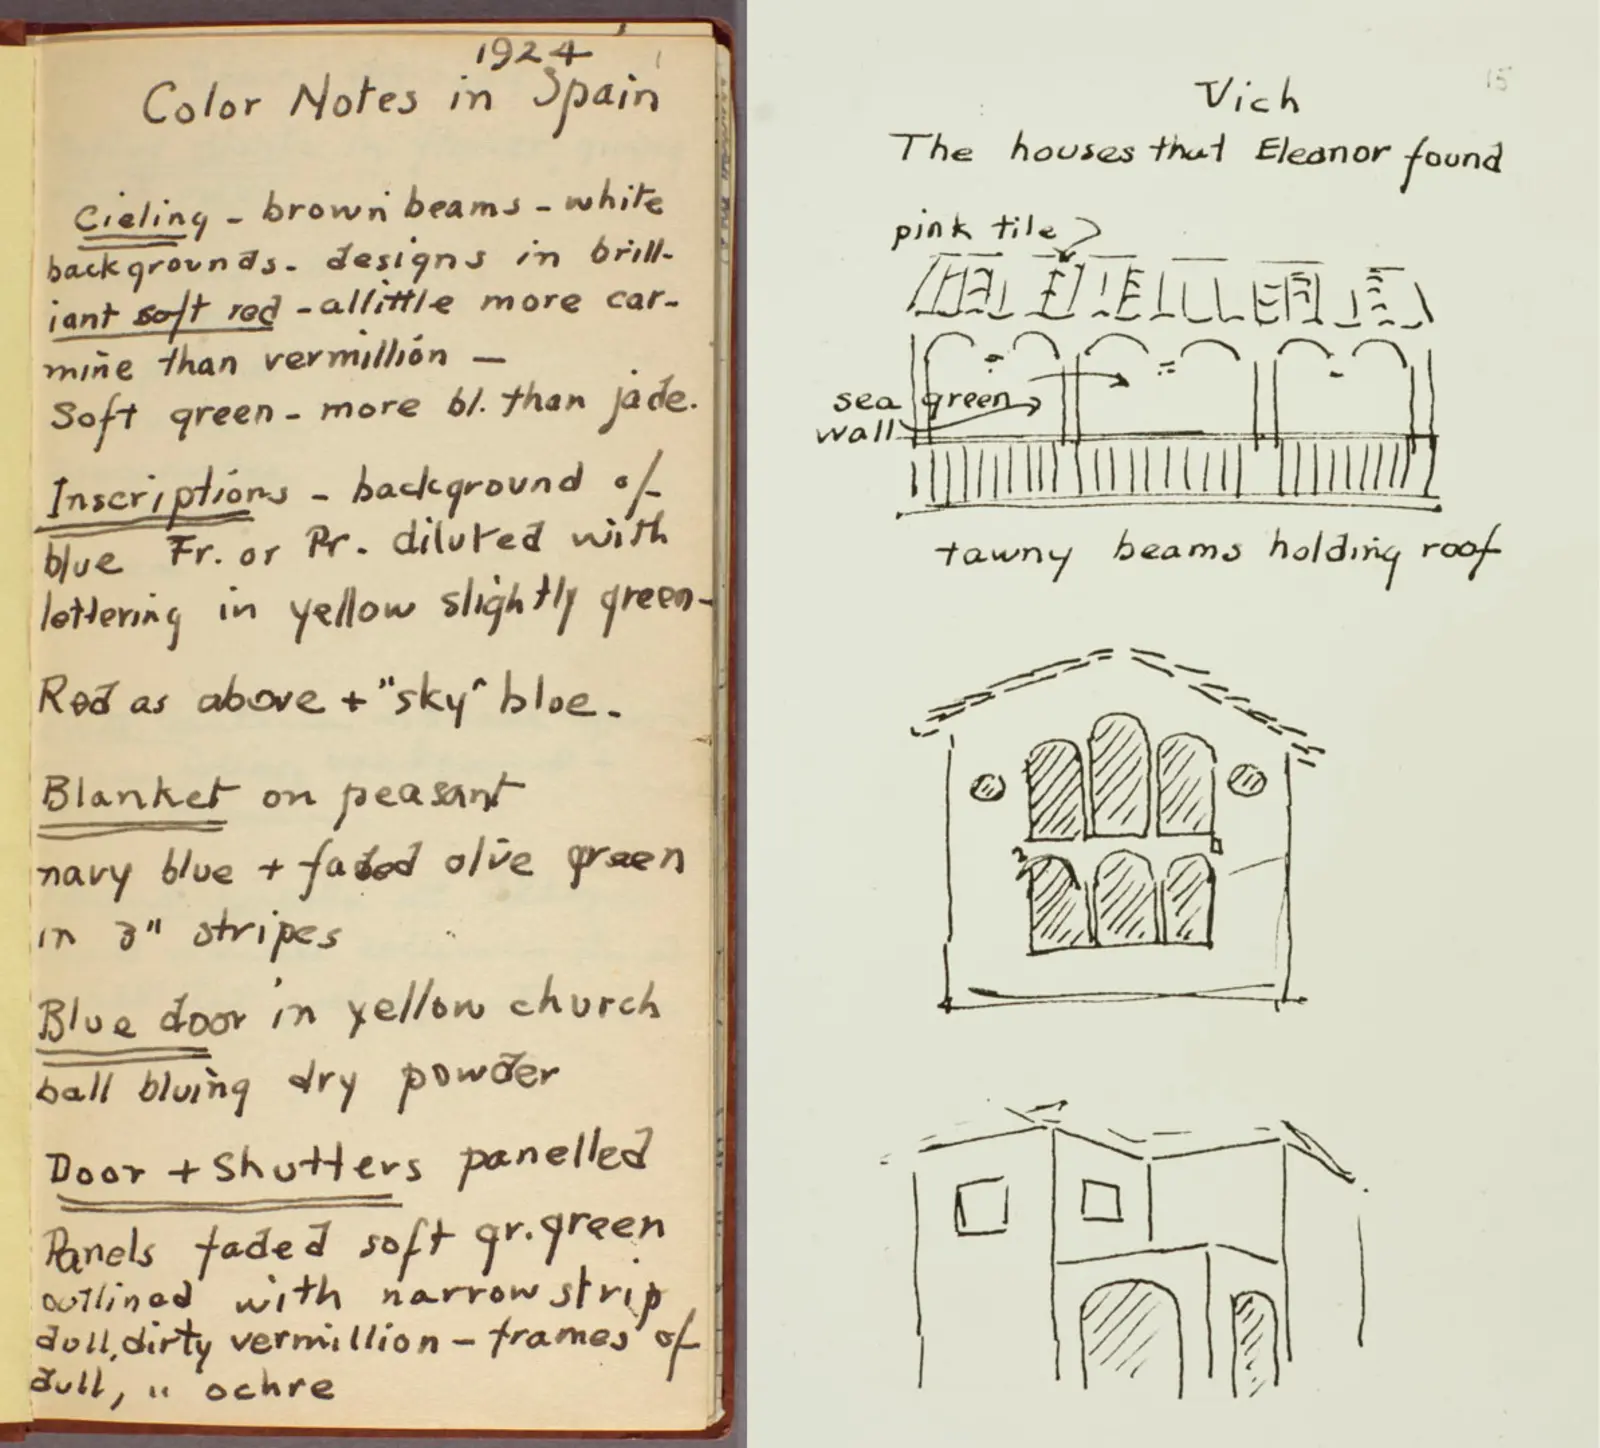 Two side-by-side images: On the left are written notes in a book; on the right are drawings of a house annotated with text.